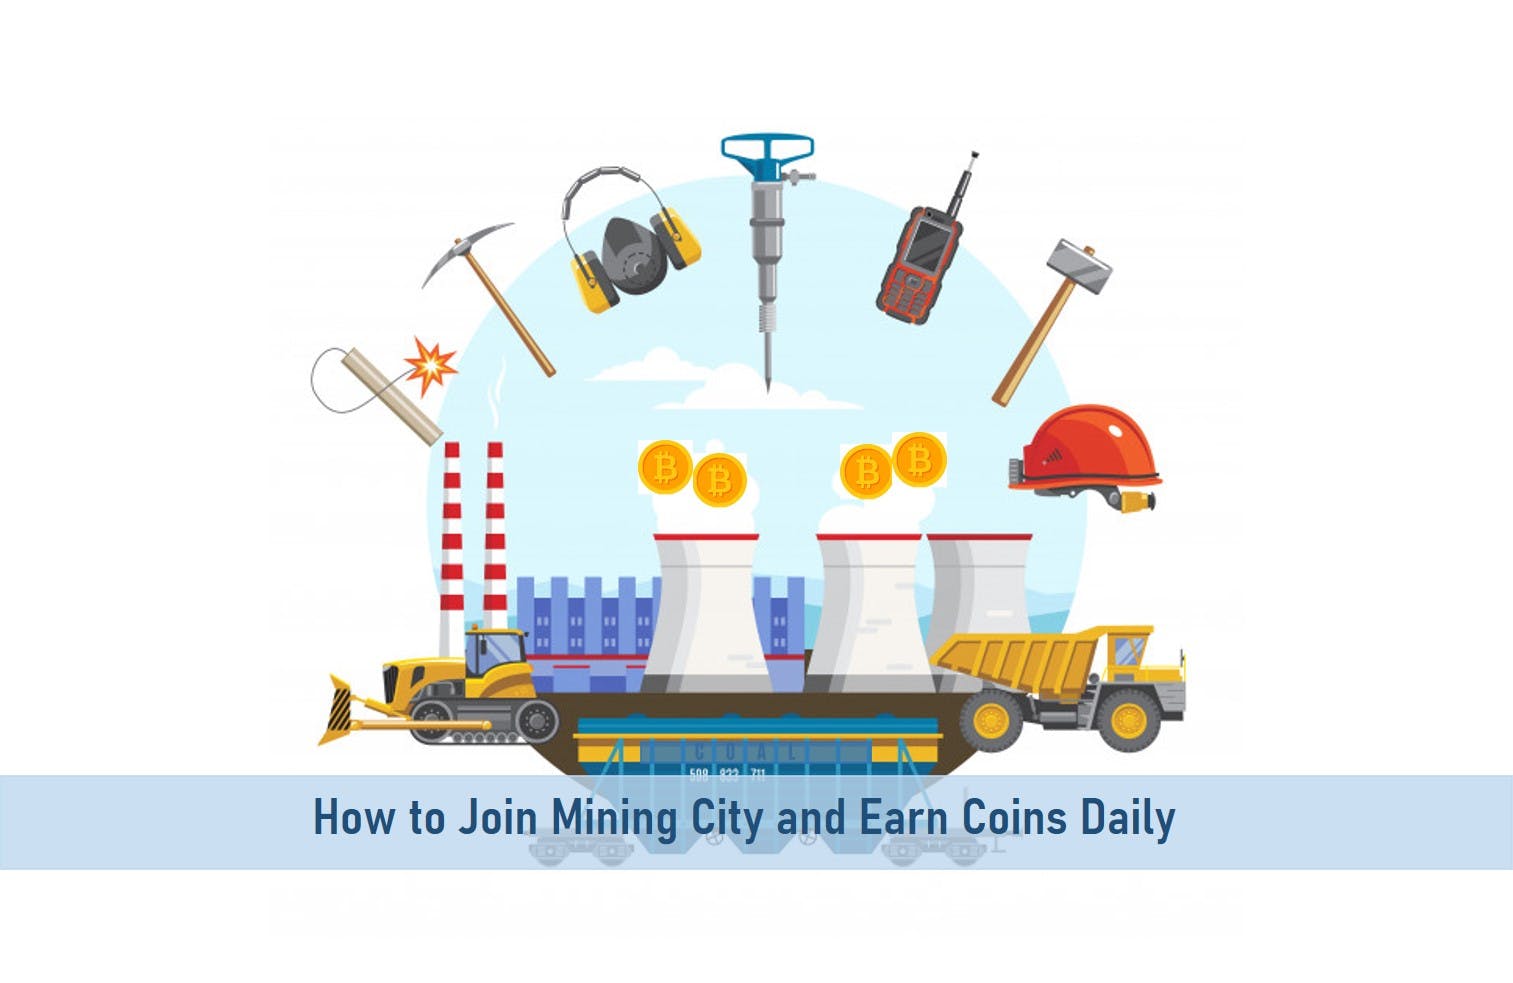 How to Join Mining City and Earn Coins Daily